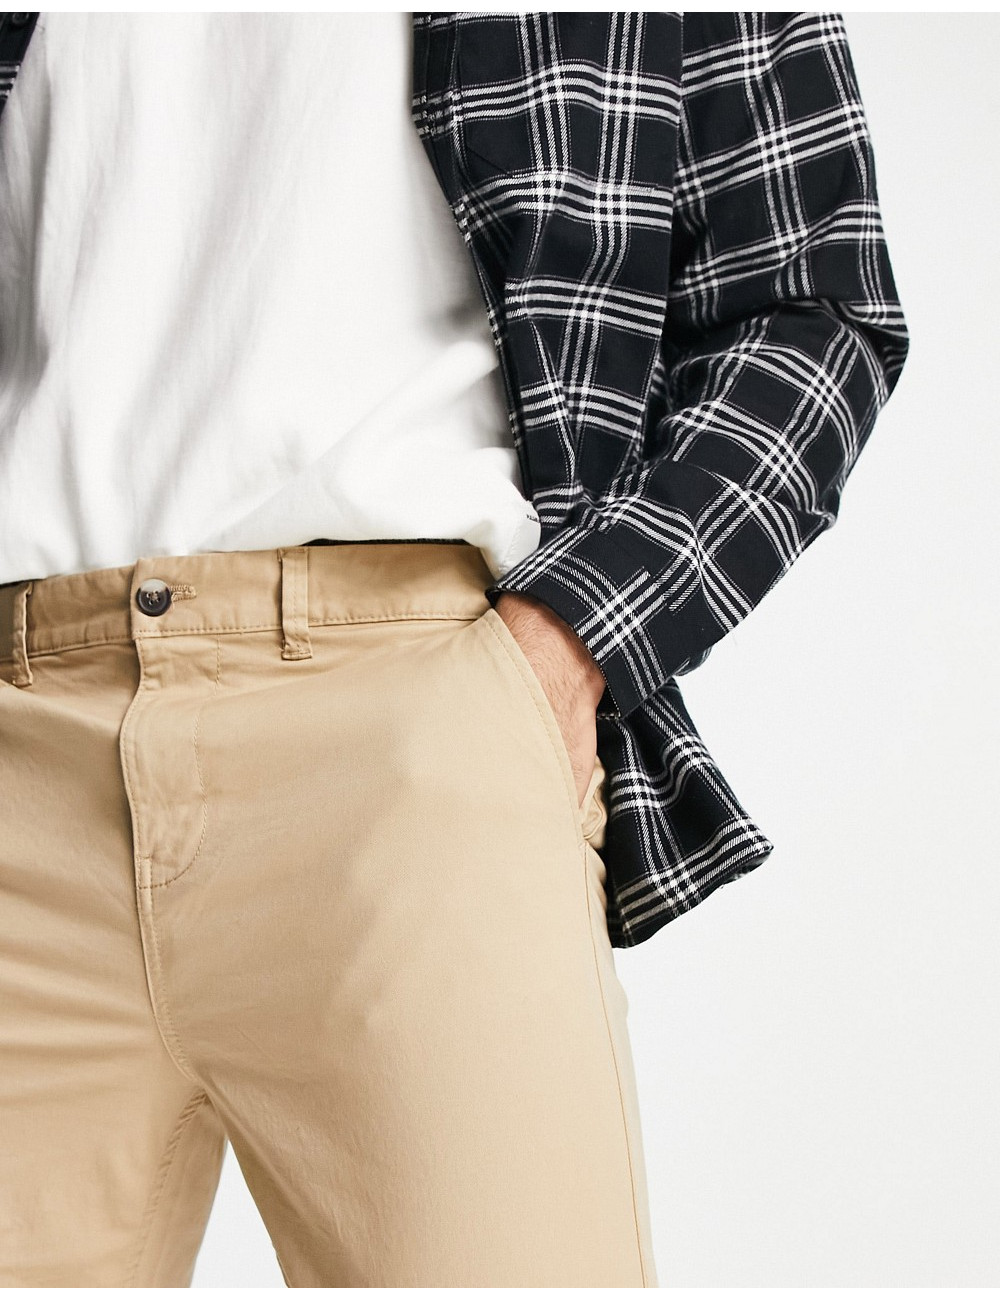 New Look tapered chino in tan